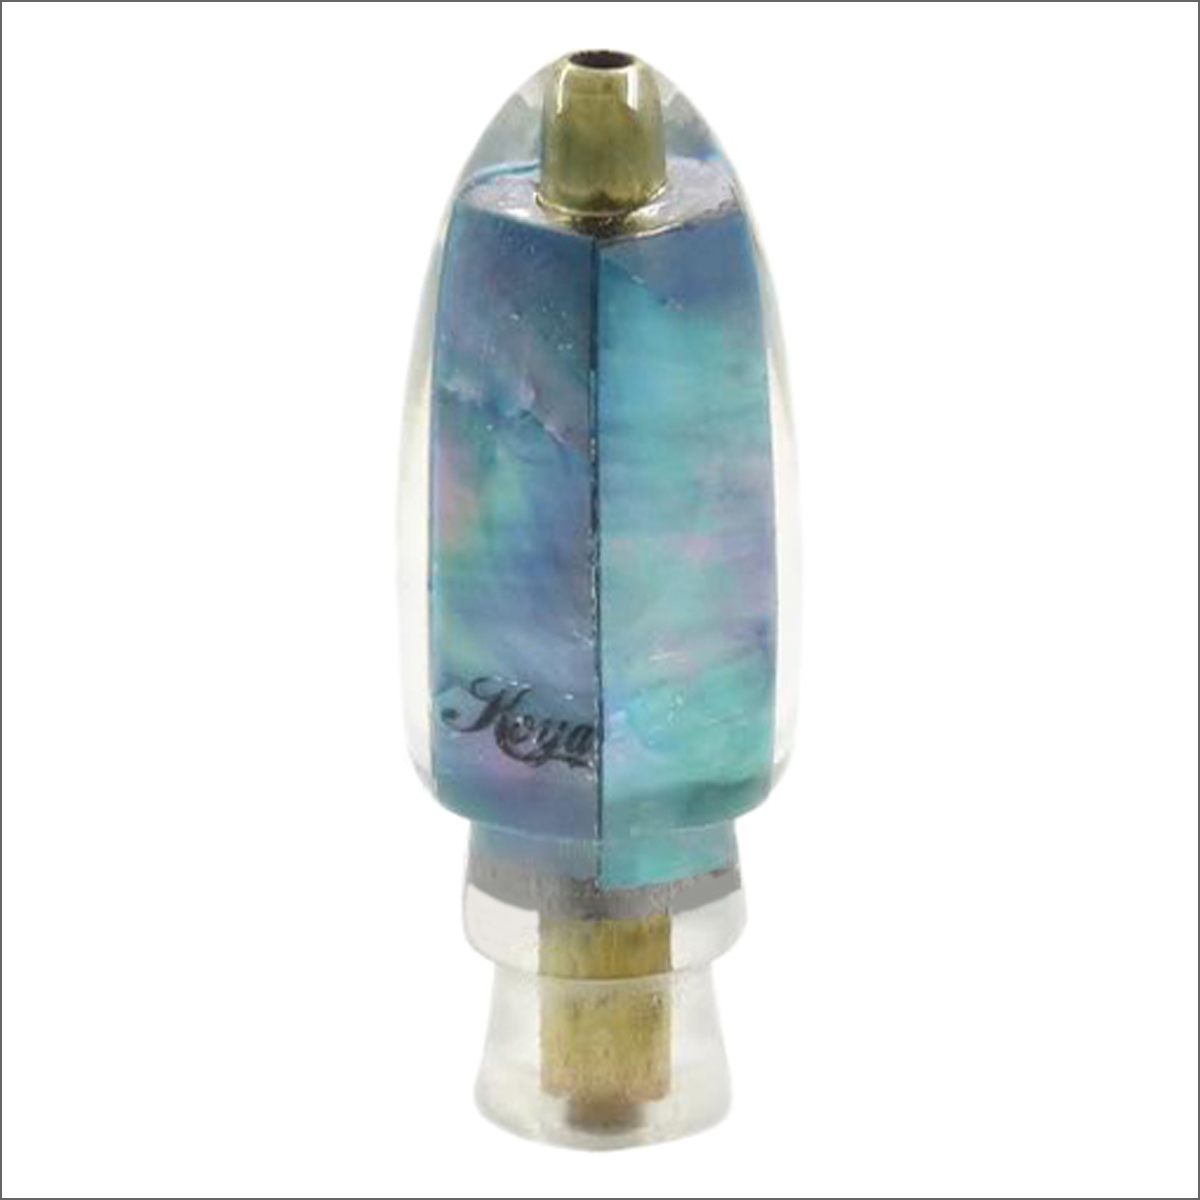 Koya Bullet Lure with a Turquoise Iridescent Mother of Pearl Shell Wrap – Extra Small